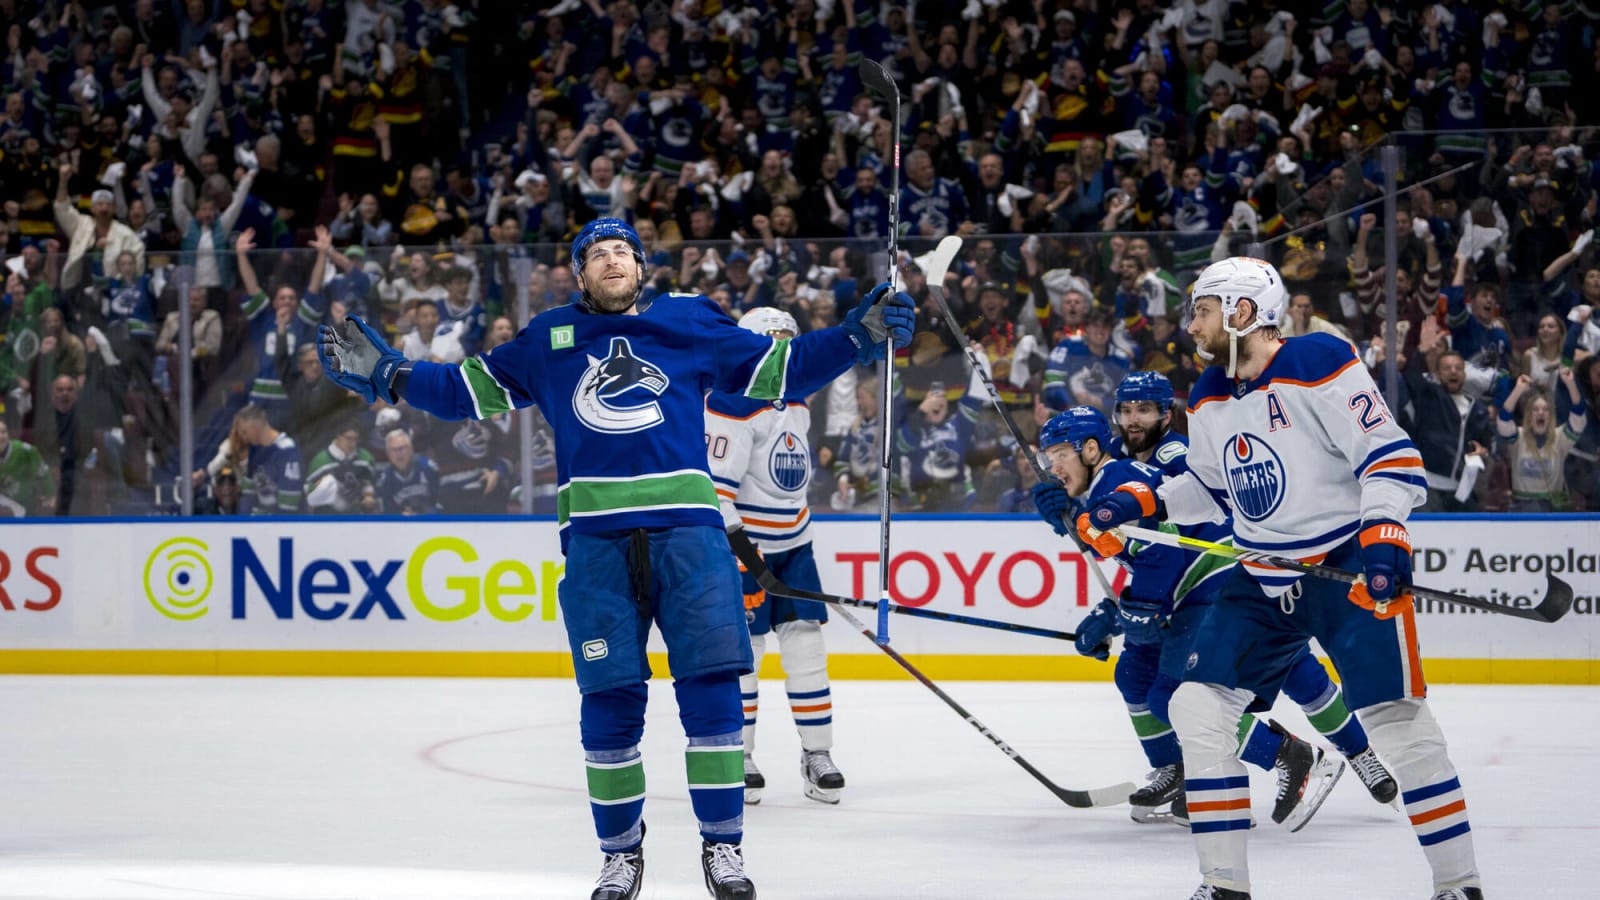 The Statsies: Rick Tocchet’s masterclass and an excellent second period help push Canucks into series lead